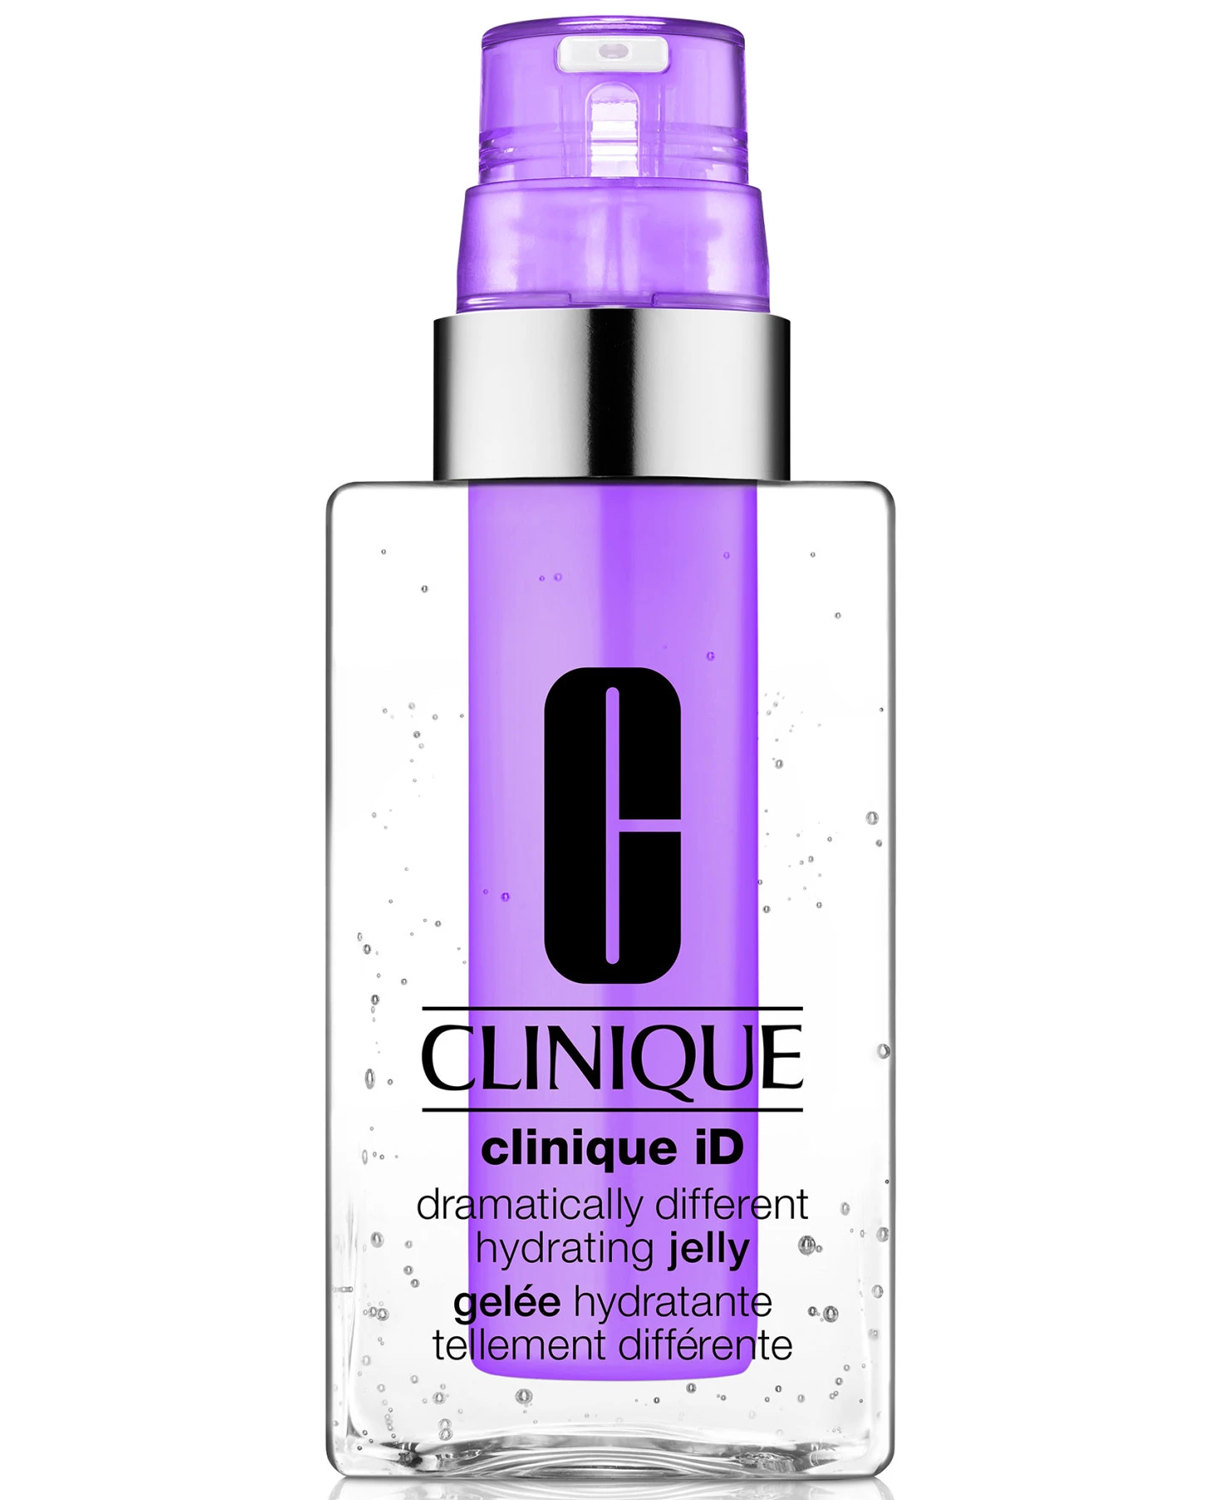 Clinique iD Dramatically Different Hydrating Jelly With Active Cartridge Concentrate™ For Lines & Wrinkles, 4.2 oz.